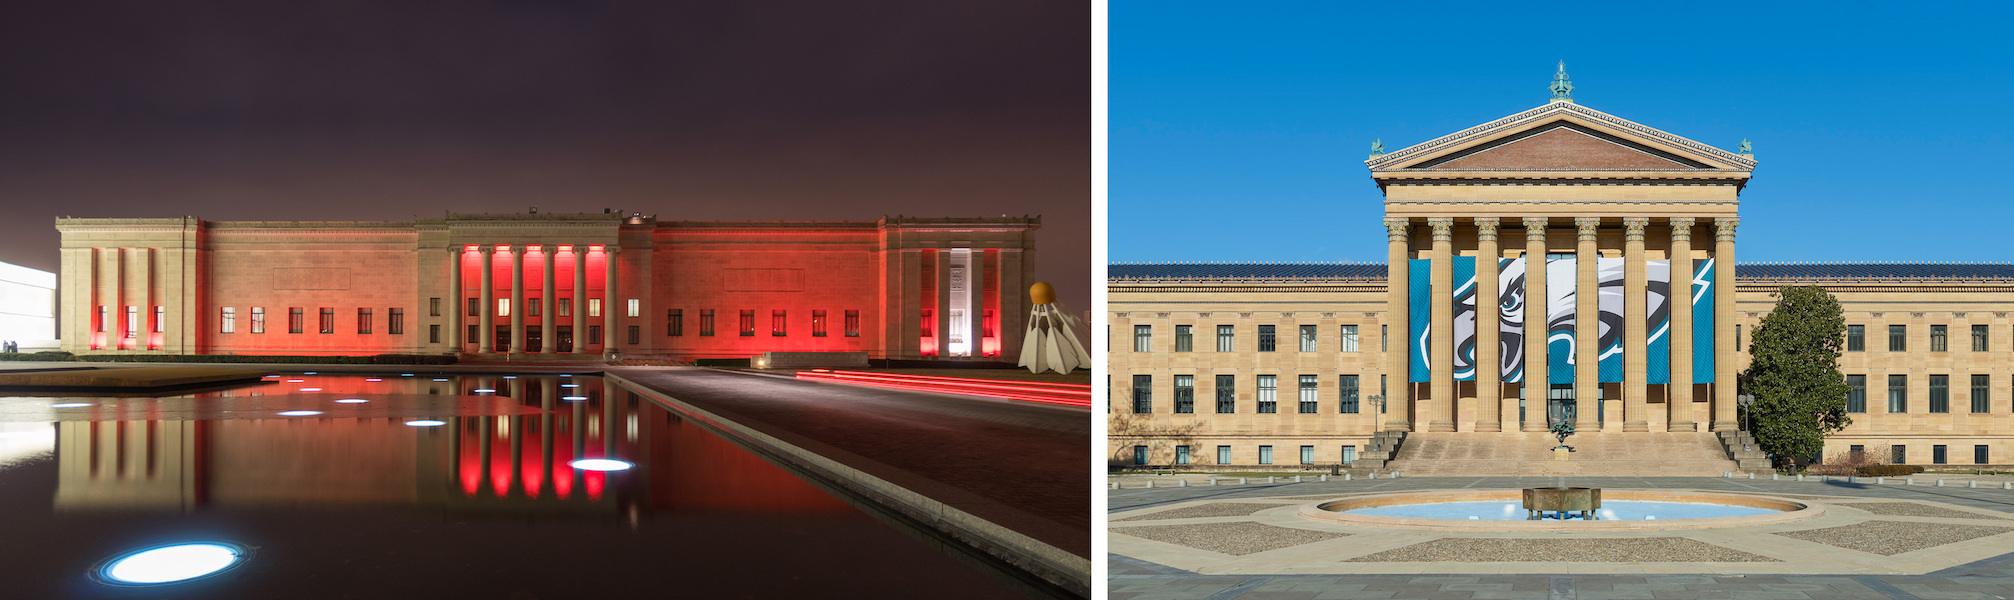 Left, the Nelson-Atkins Museum of Art in Kansas City, Mo.; Right, the Philadelphia Museum of Art in Philadelphia. The museums are cheering on the Kansas City Chiefs and the Philadelphia Eagles in the upcoming Super Bowl and marking it with a friendly bet: The loser has to loan the winner a choice work of art from its collection. Images courtesy of the Nelson-Atkins Museum of Art and the Philadelphia Museum of Art 